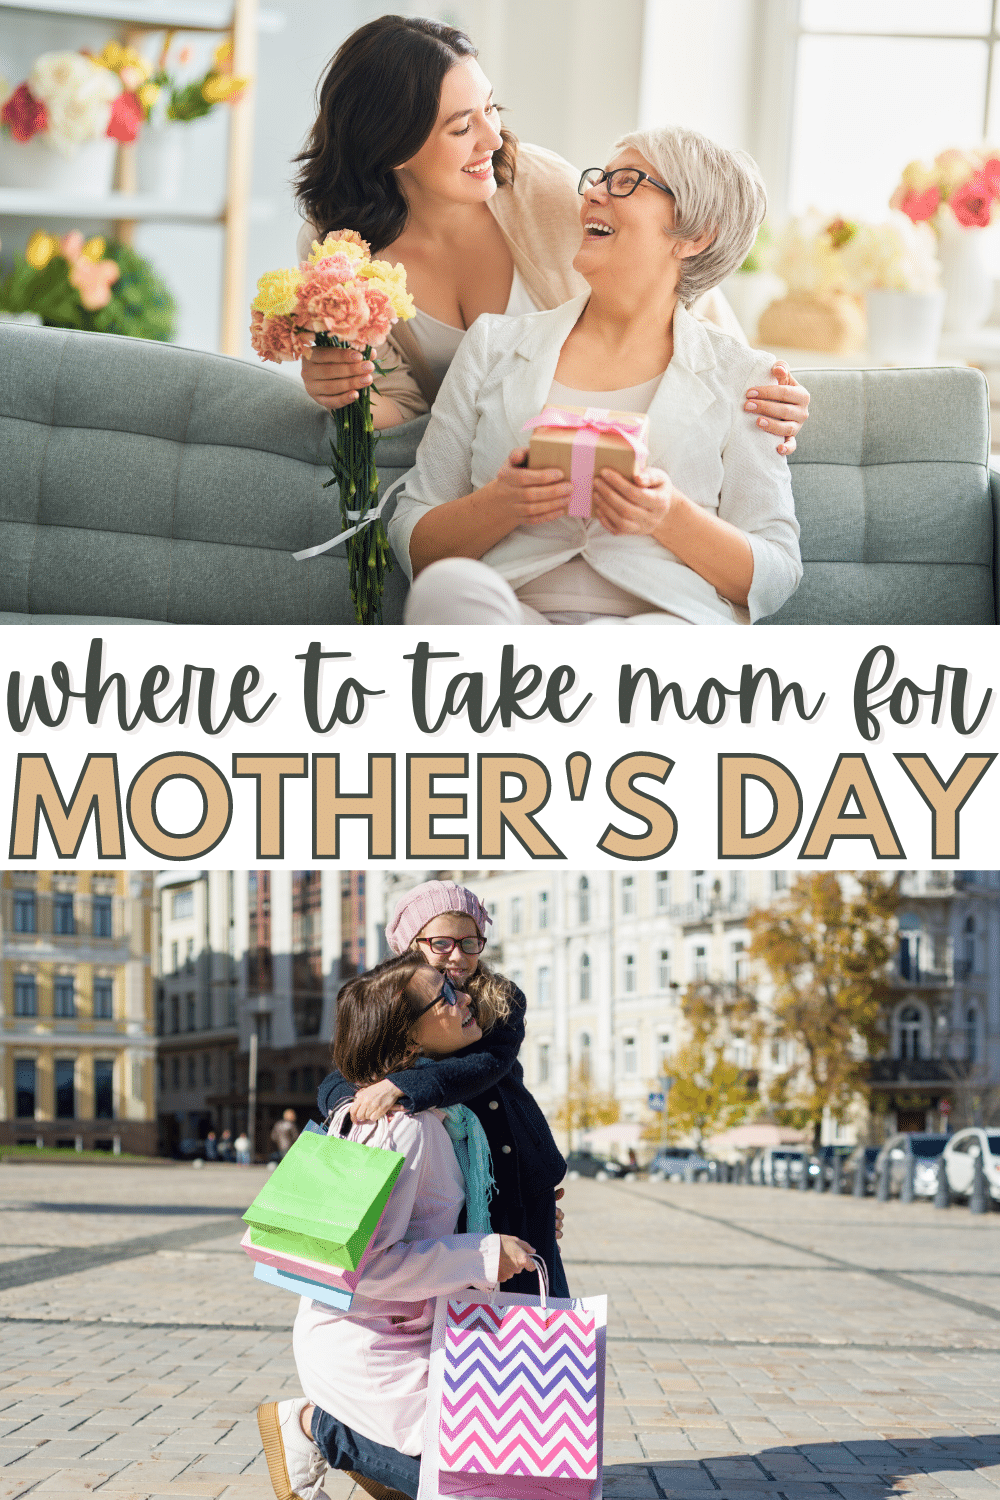 Mom spends a lot of time working on the house. Give her a break on Mother's Day and take her out. Here are some ideas of where to take mom for Mother's Day. #mothersday #formom #mothersdaygifts #forher via @wondermomwannab